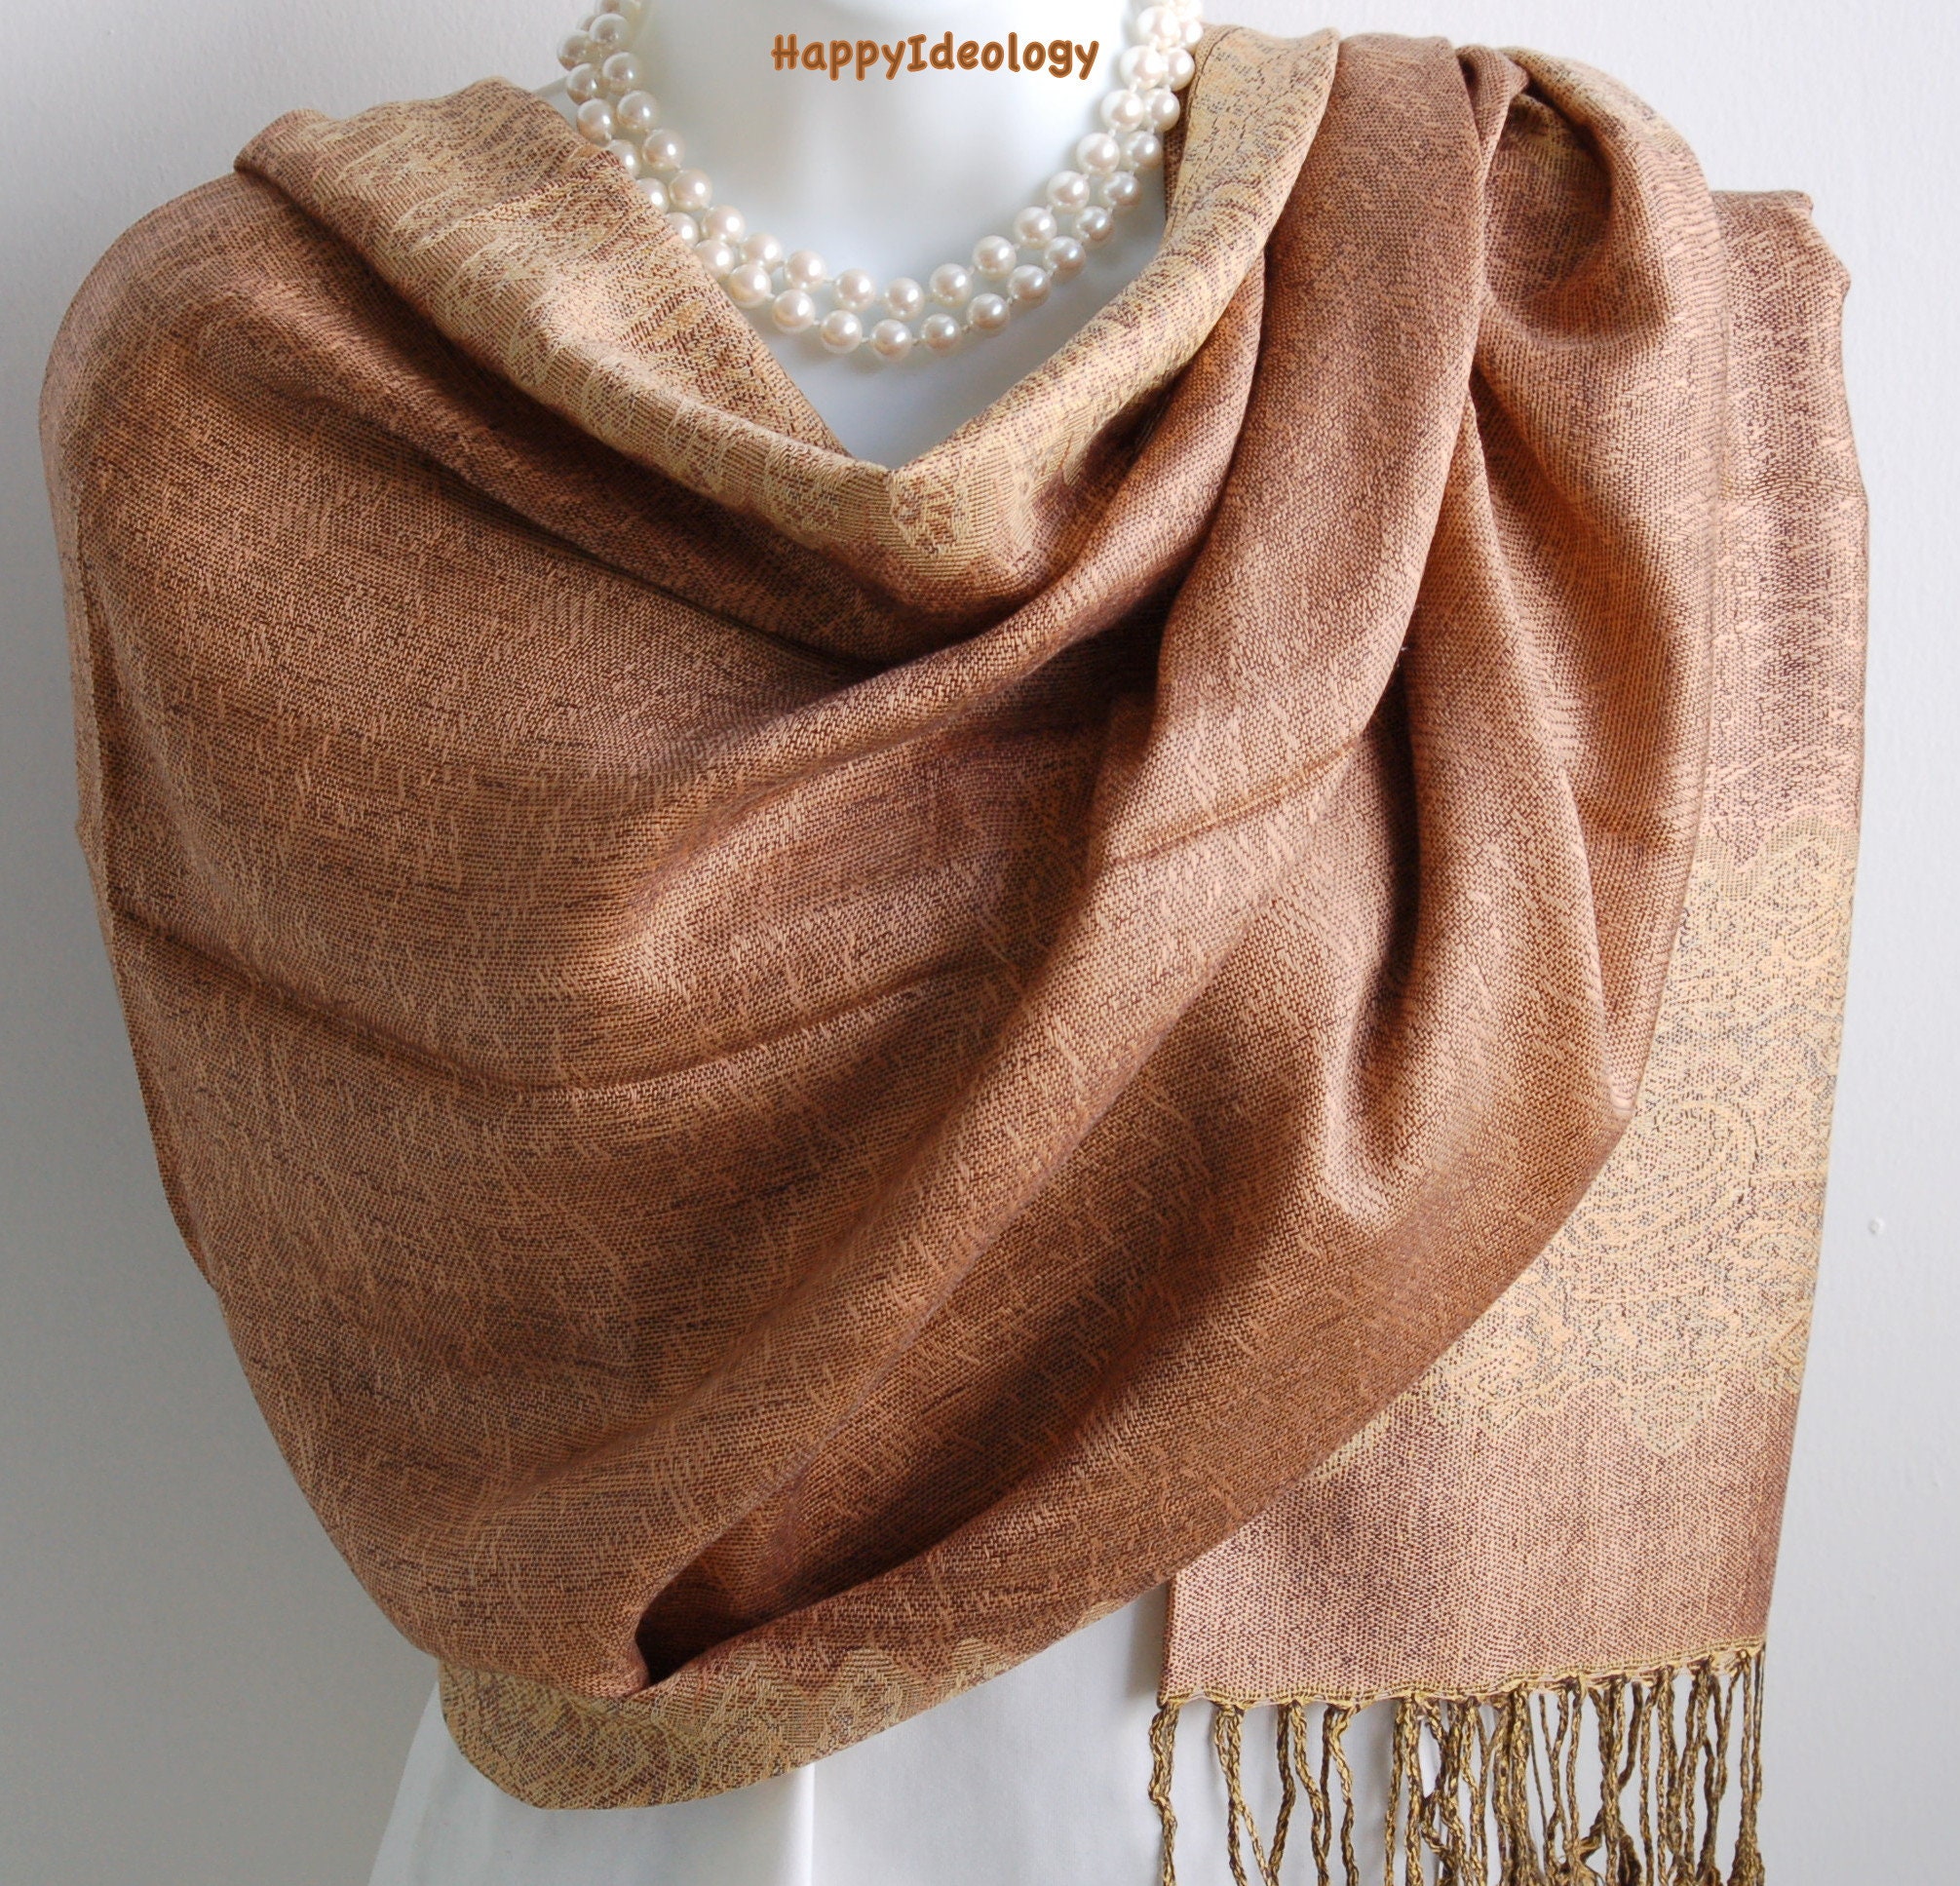 Spotty Brown and tan reversible pashmina scarf scarves shawl wrap present gift